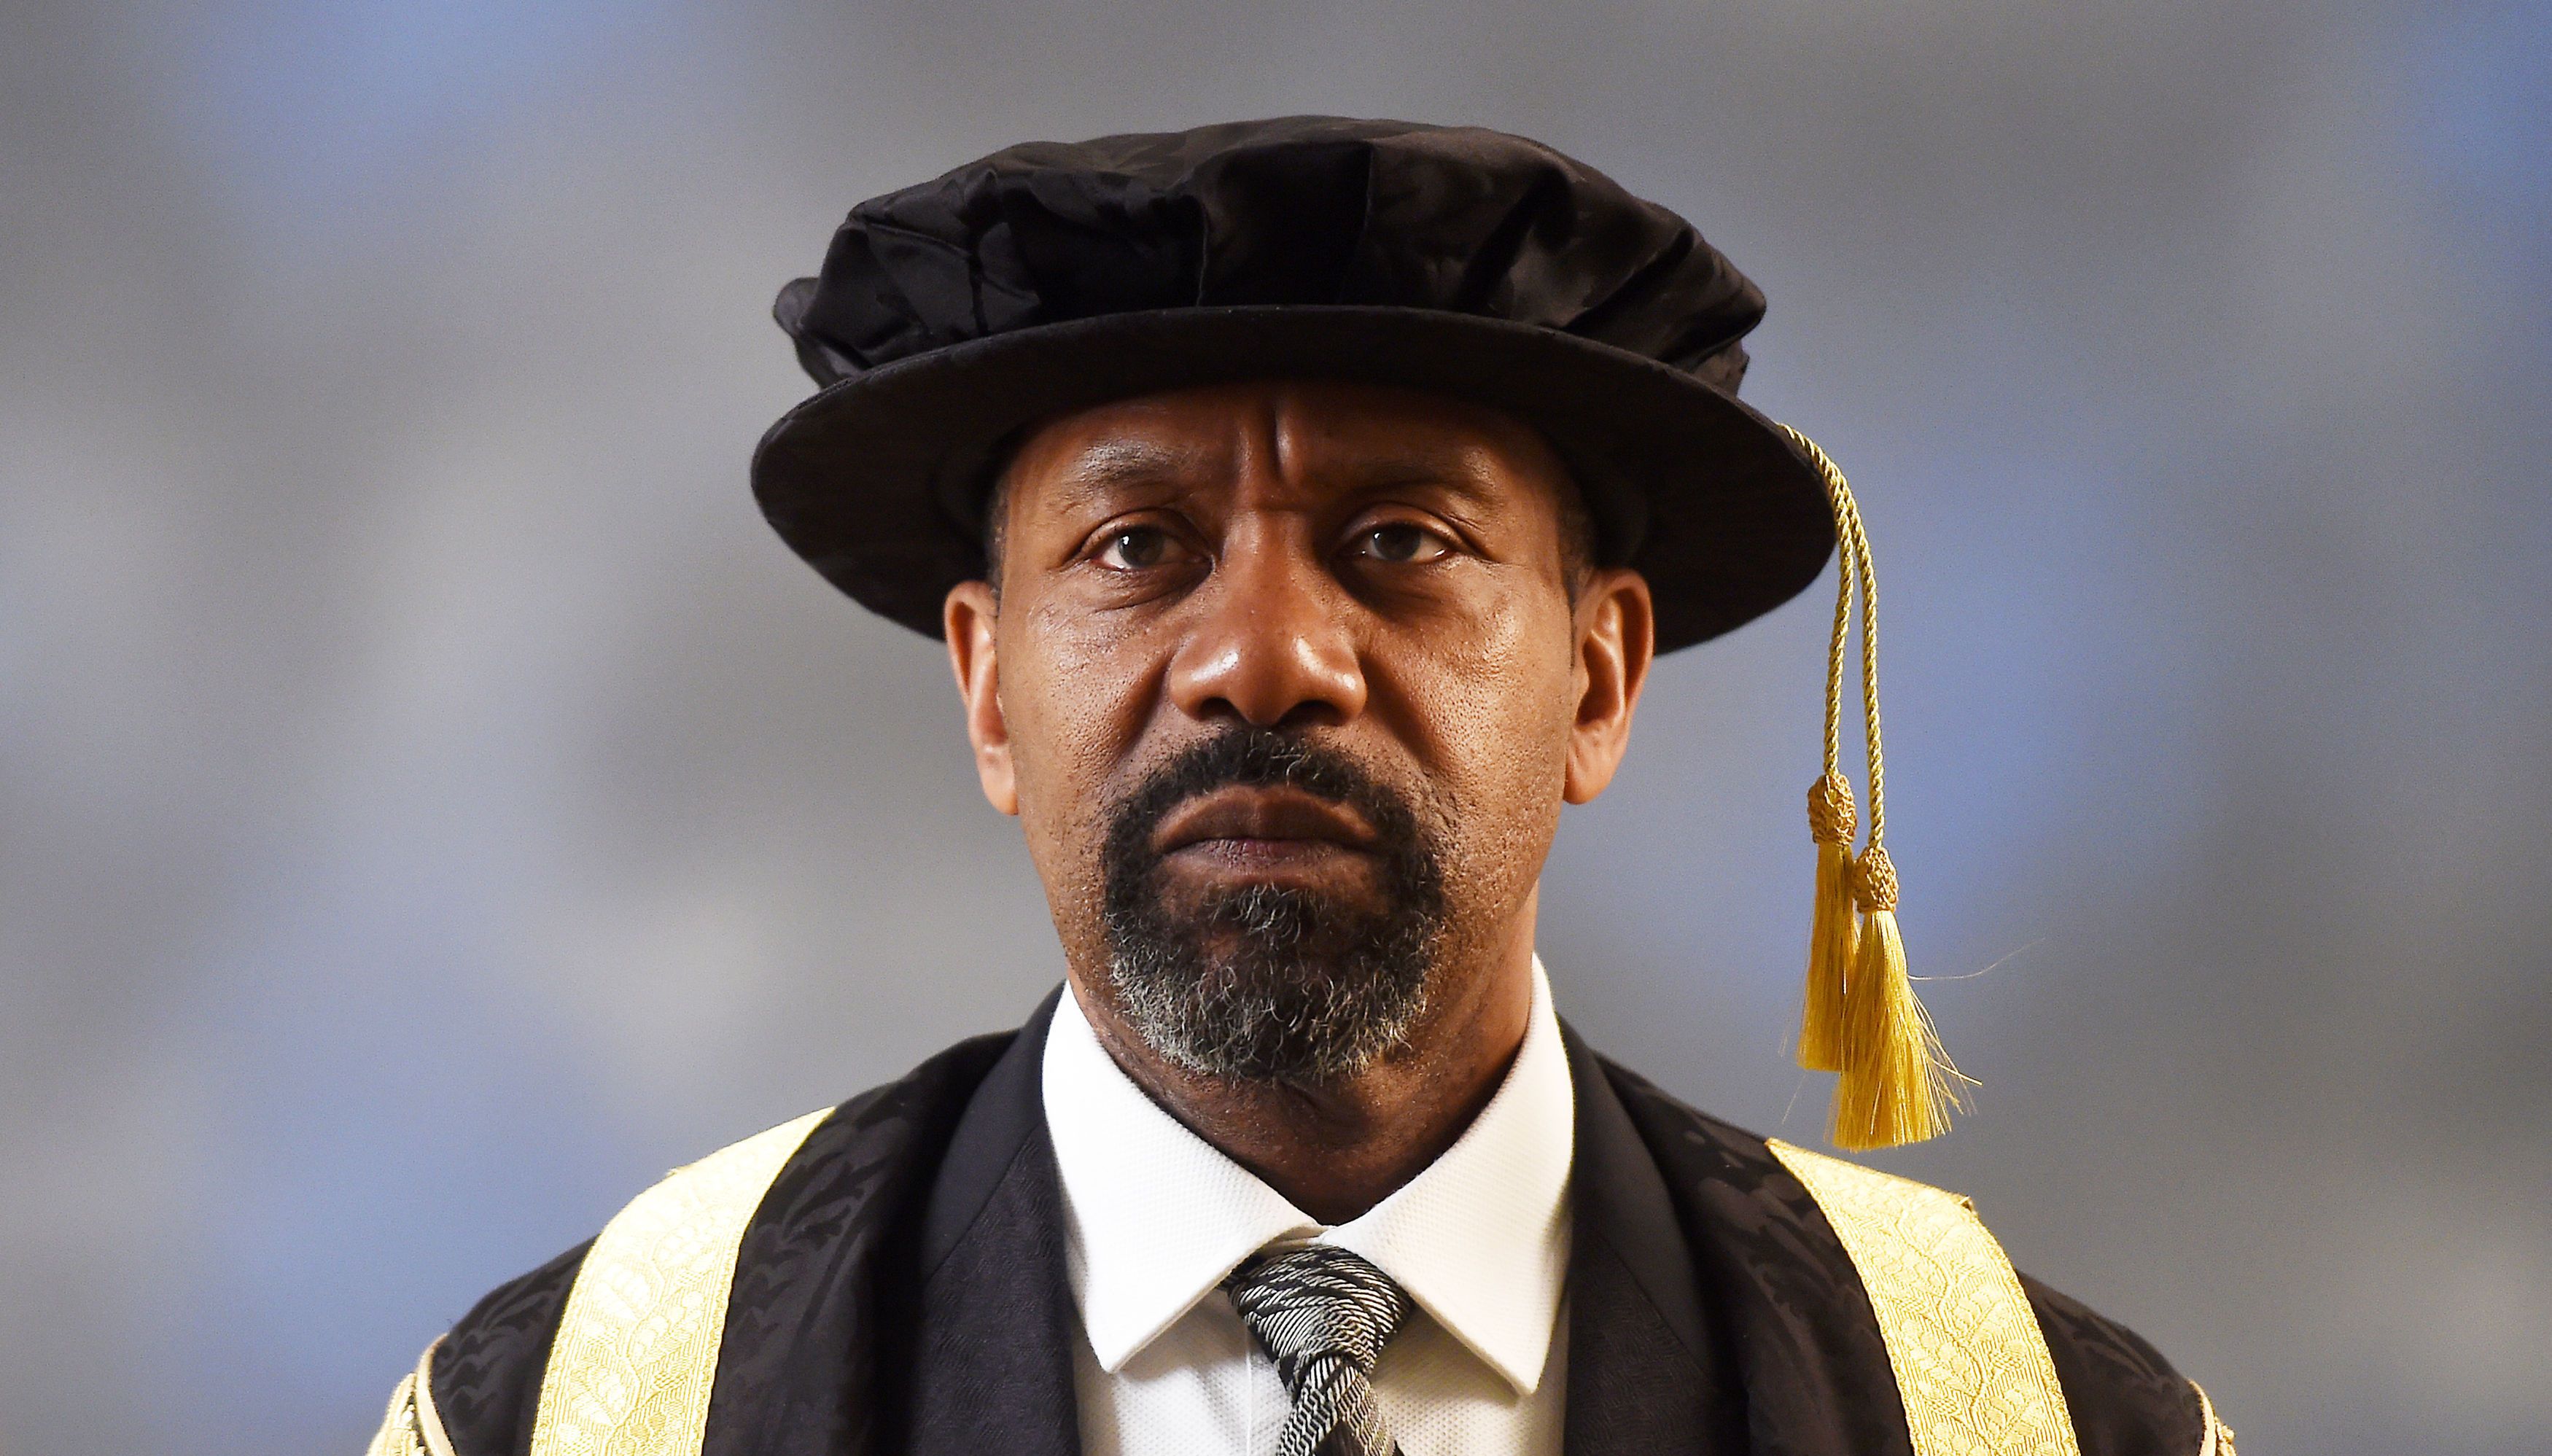 Sir Lenny Henry wears his new ceremonial robes for the first time as he formally accepts his role as Chancellor of Birmingham City University during the installation ceremony at Birmingham Town Hall.